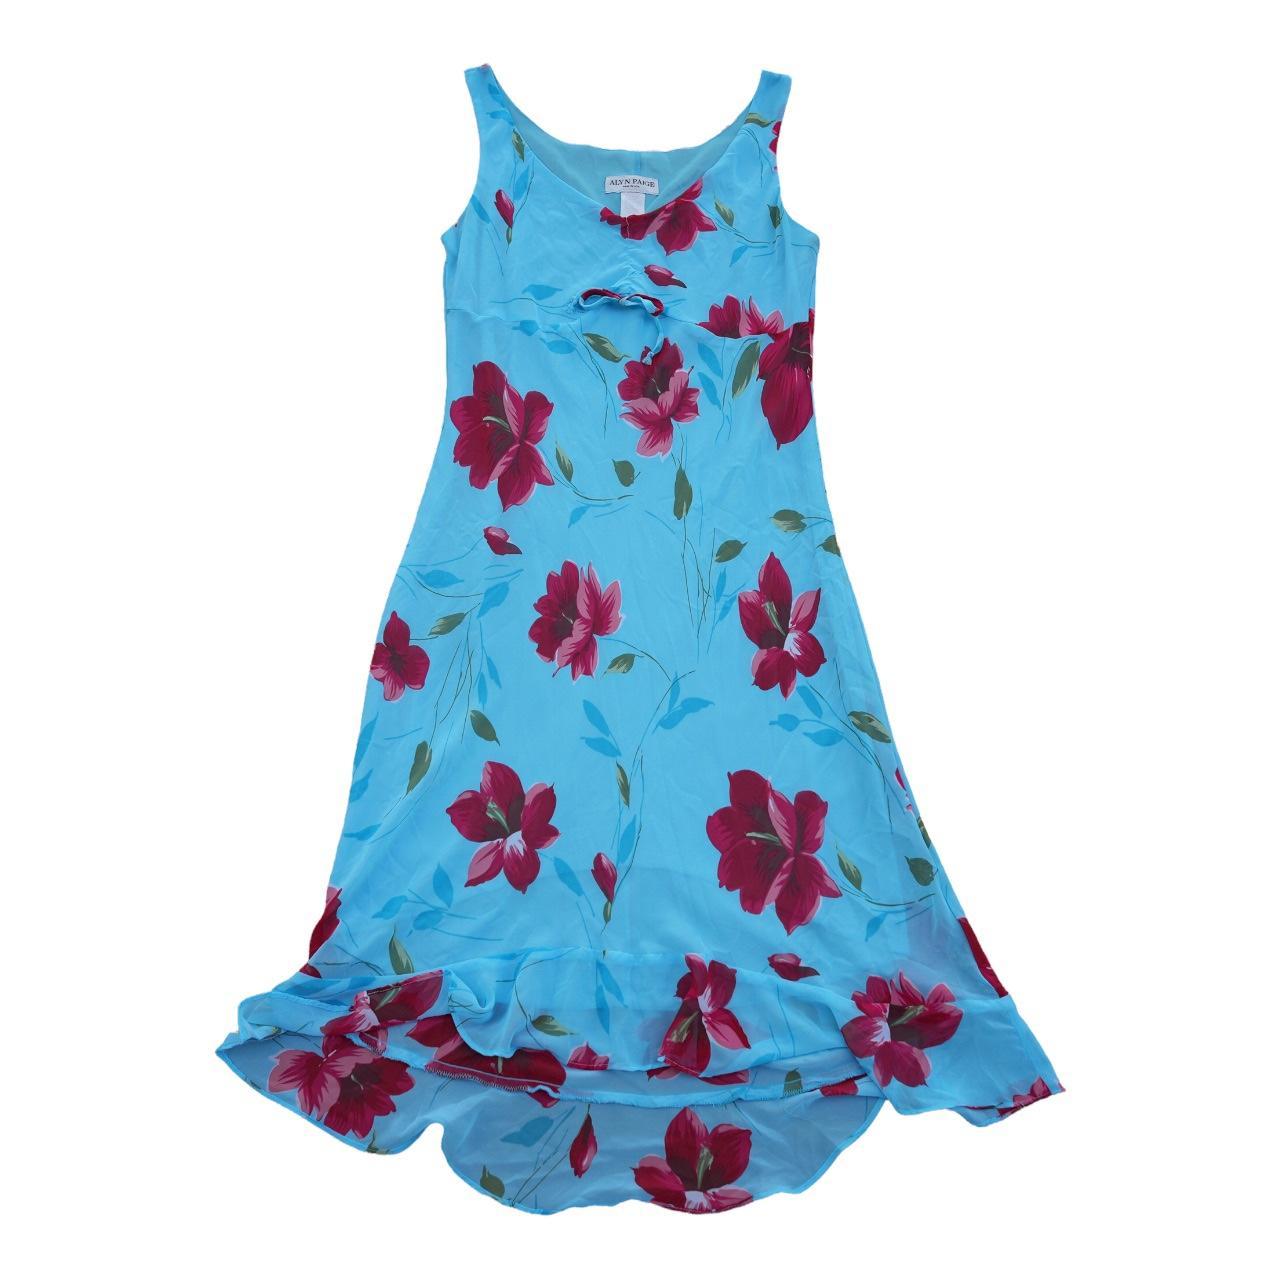 PAIGE Women's Blue and Red Dress (6)